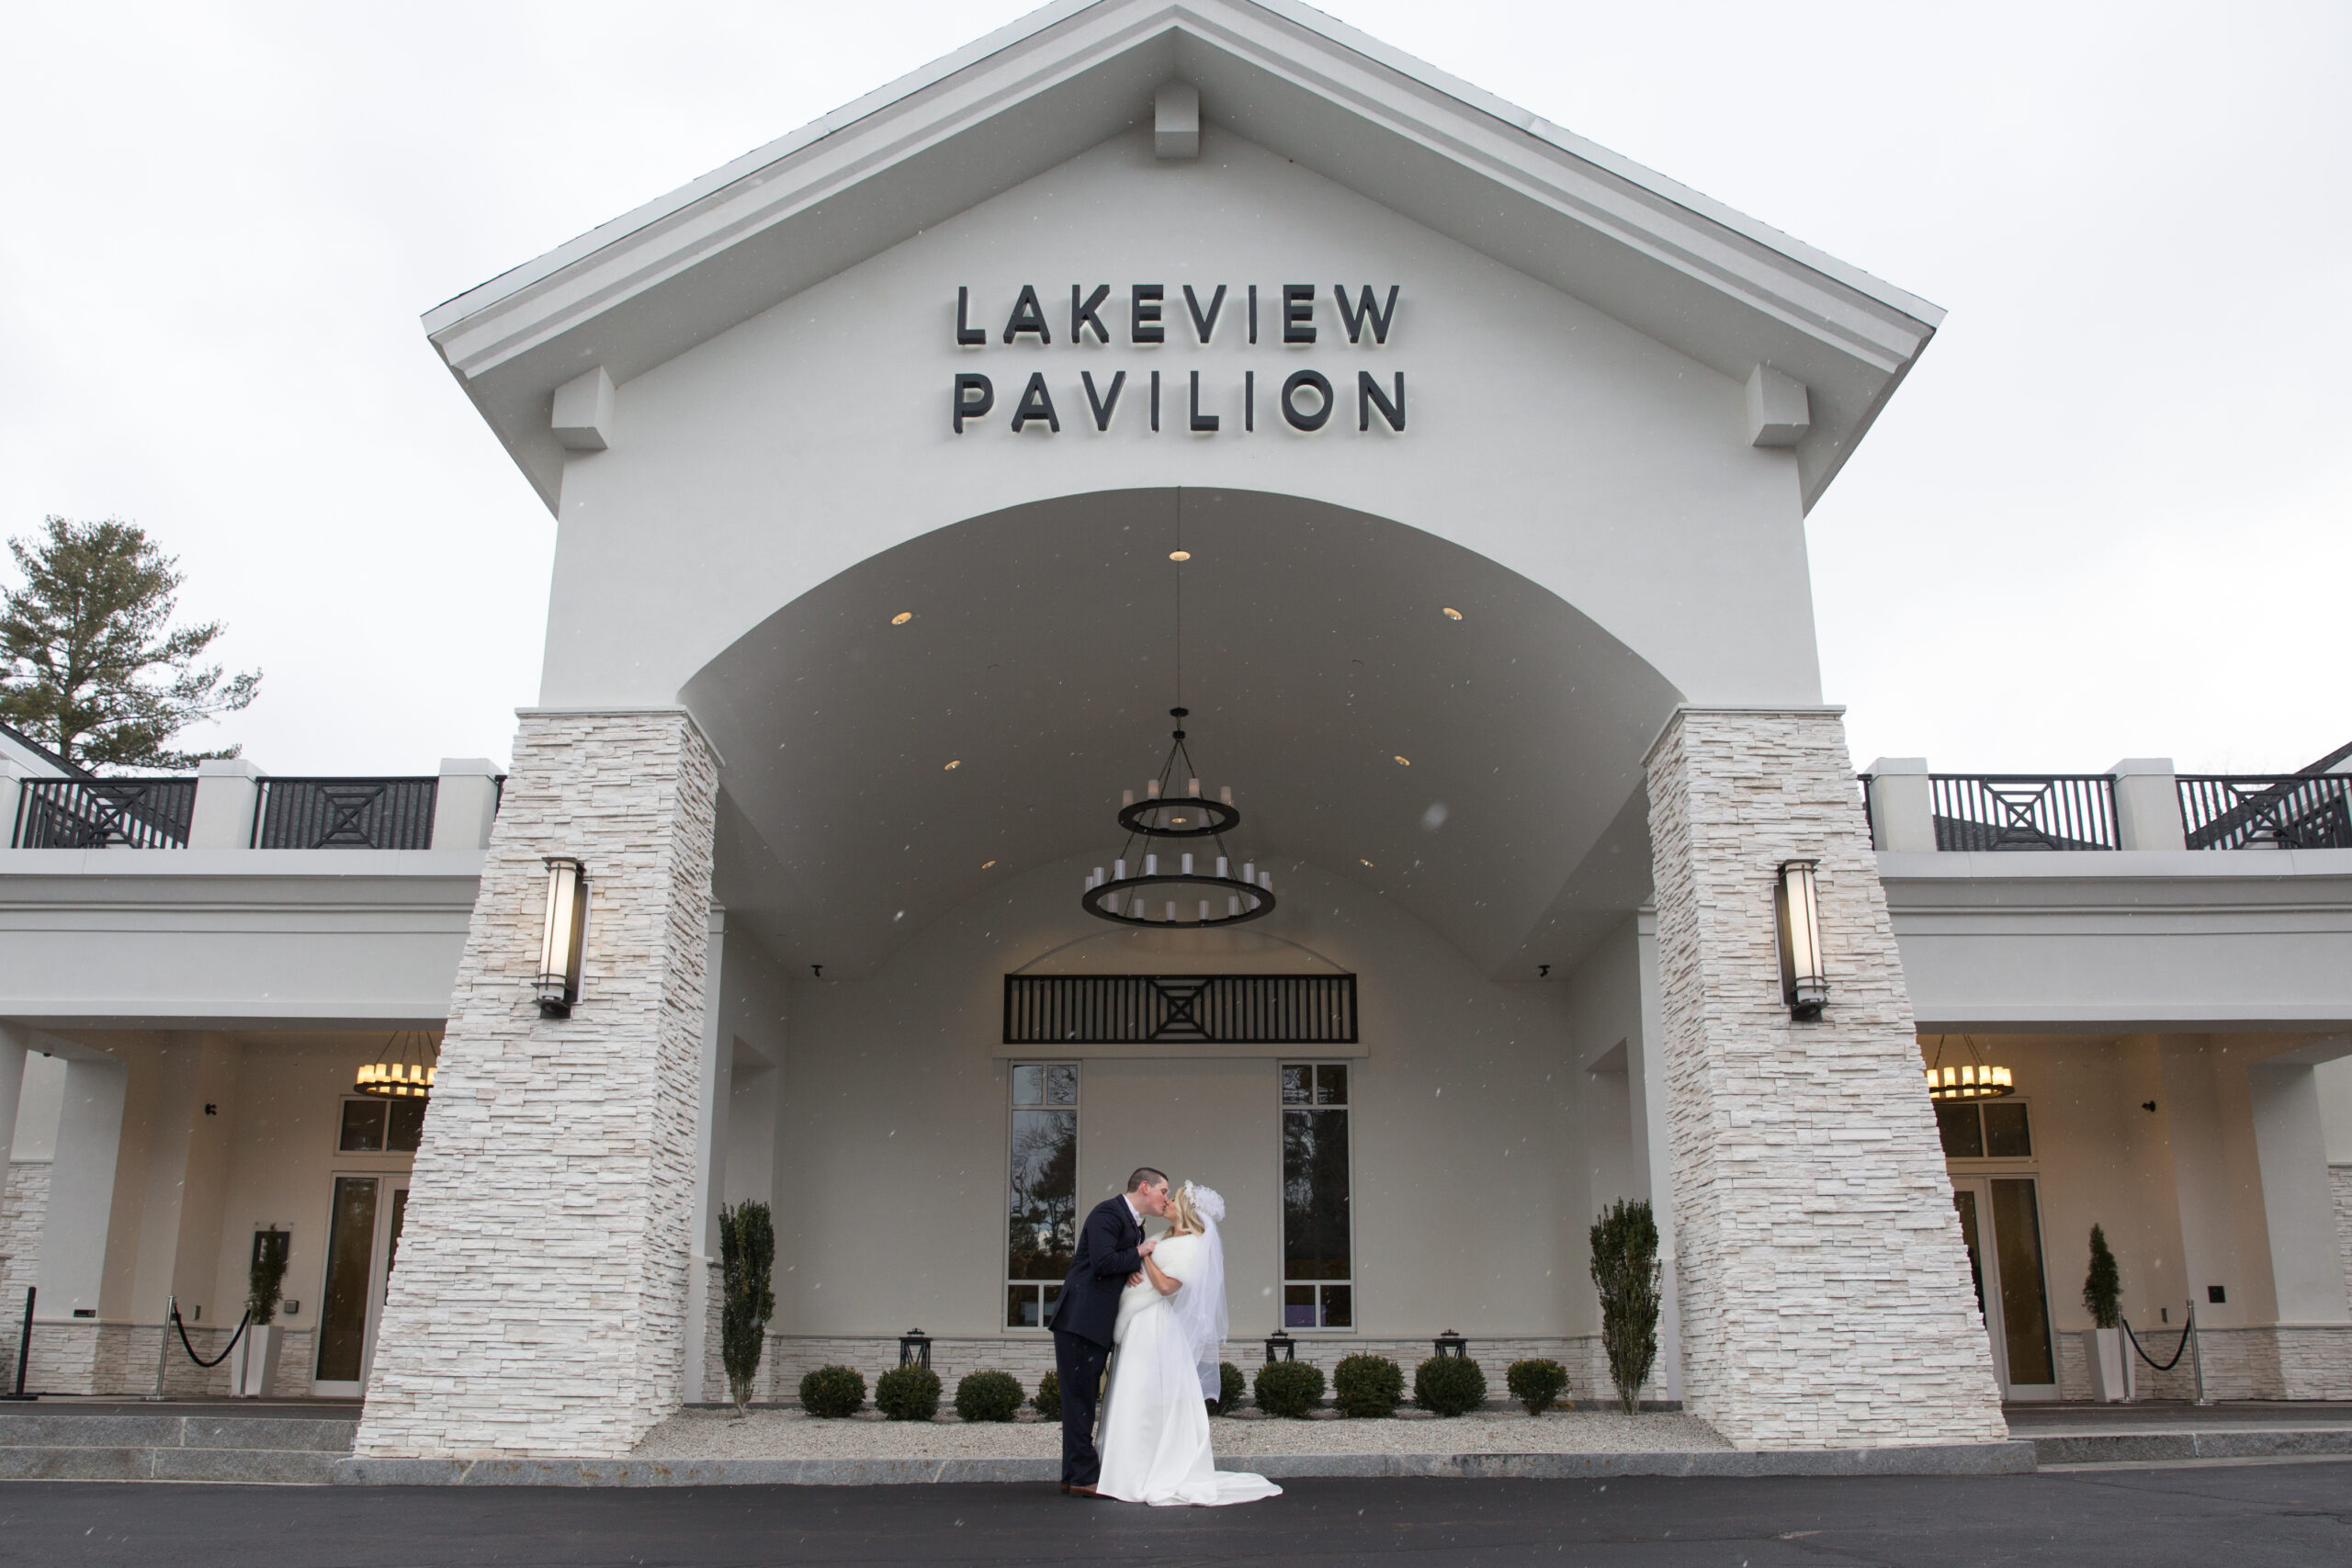 Bride and groom kiss outside the entrance to Lakeview Pavilion in Foxboro MA.